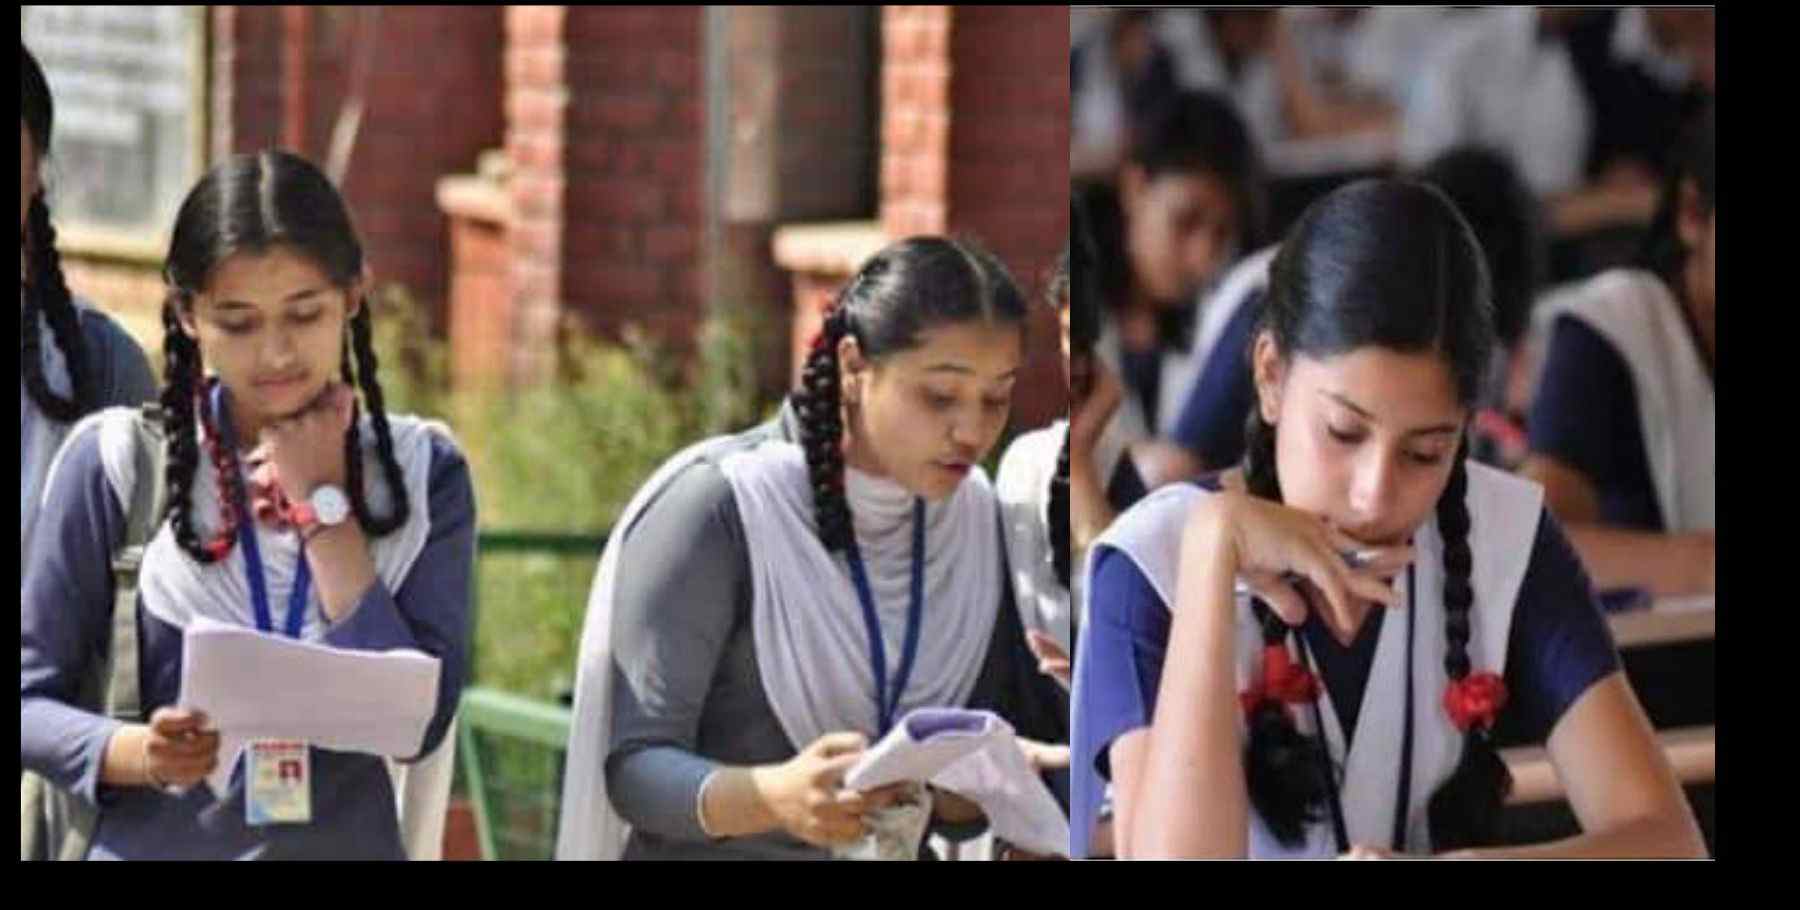 Uttarakhand news: Time table for 10th and 12th board exams 2023 declared, see complete schedule. Uttrakhand Board Exam 2023